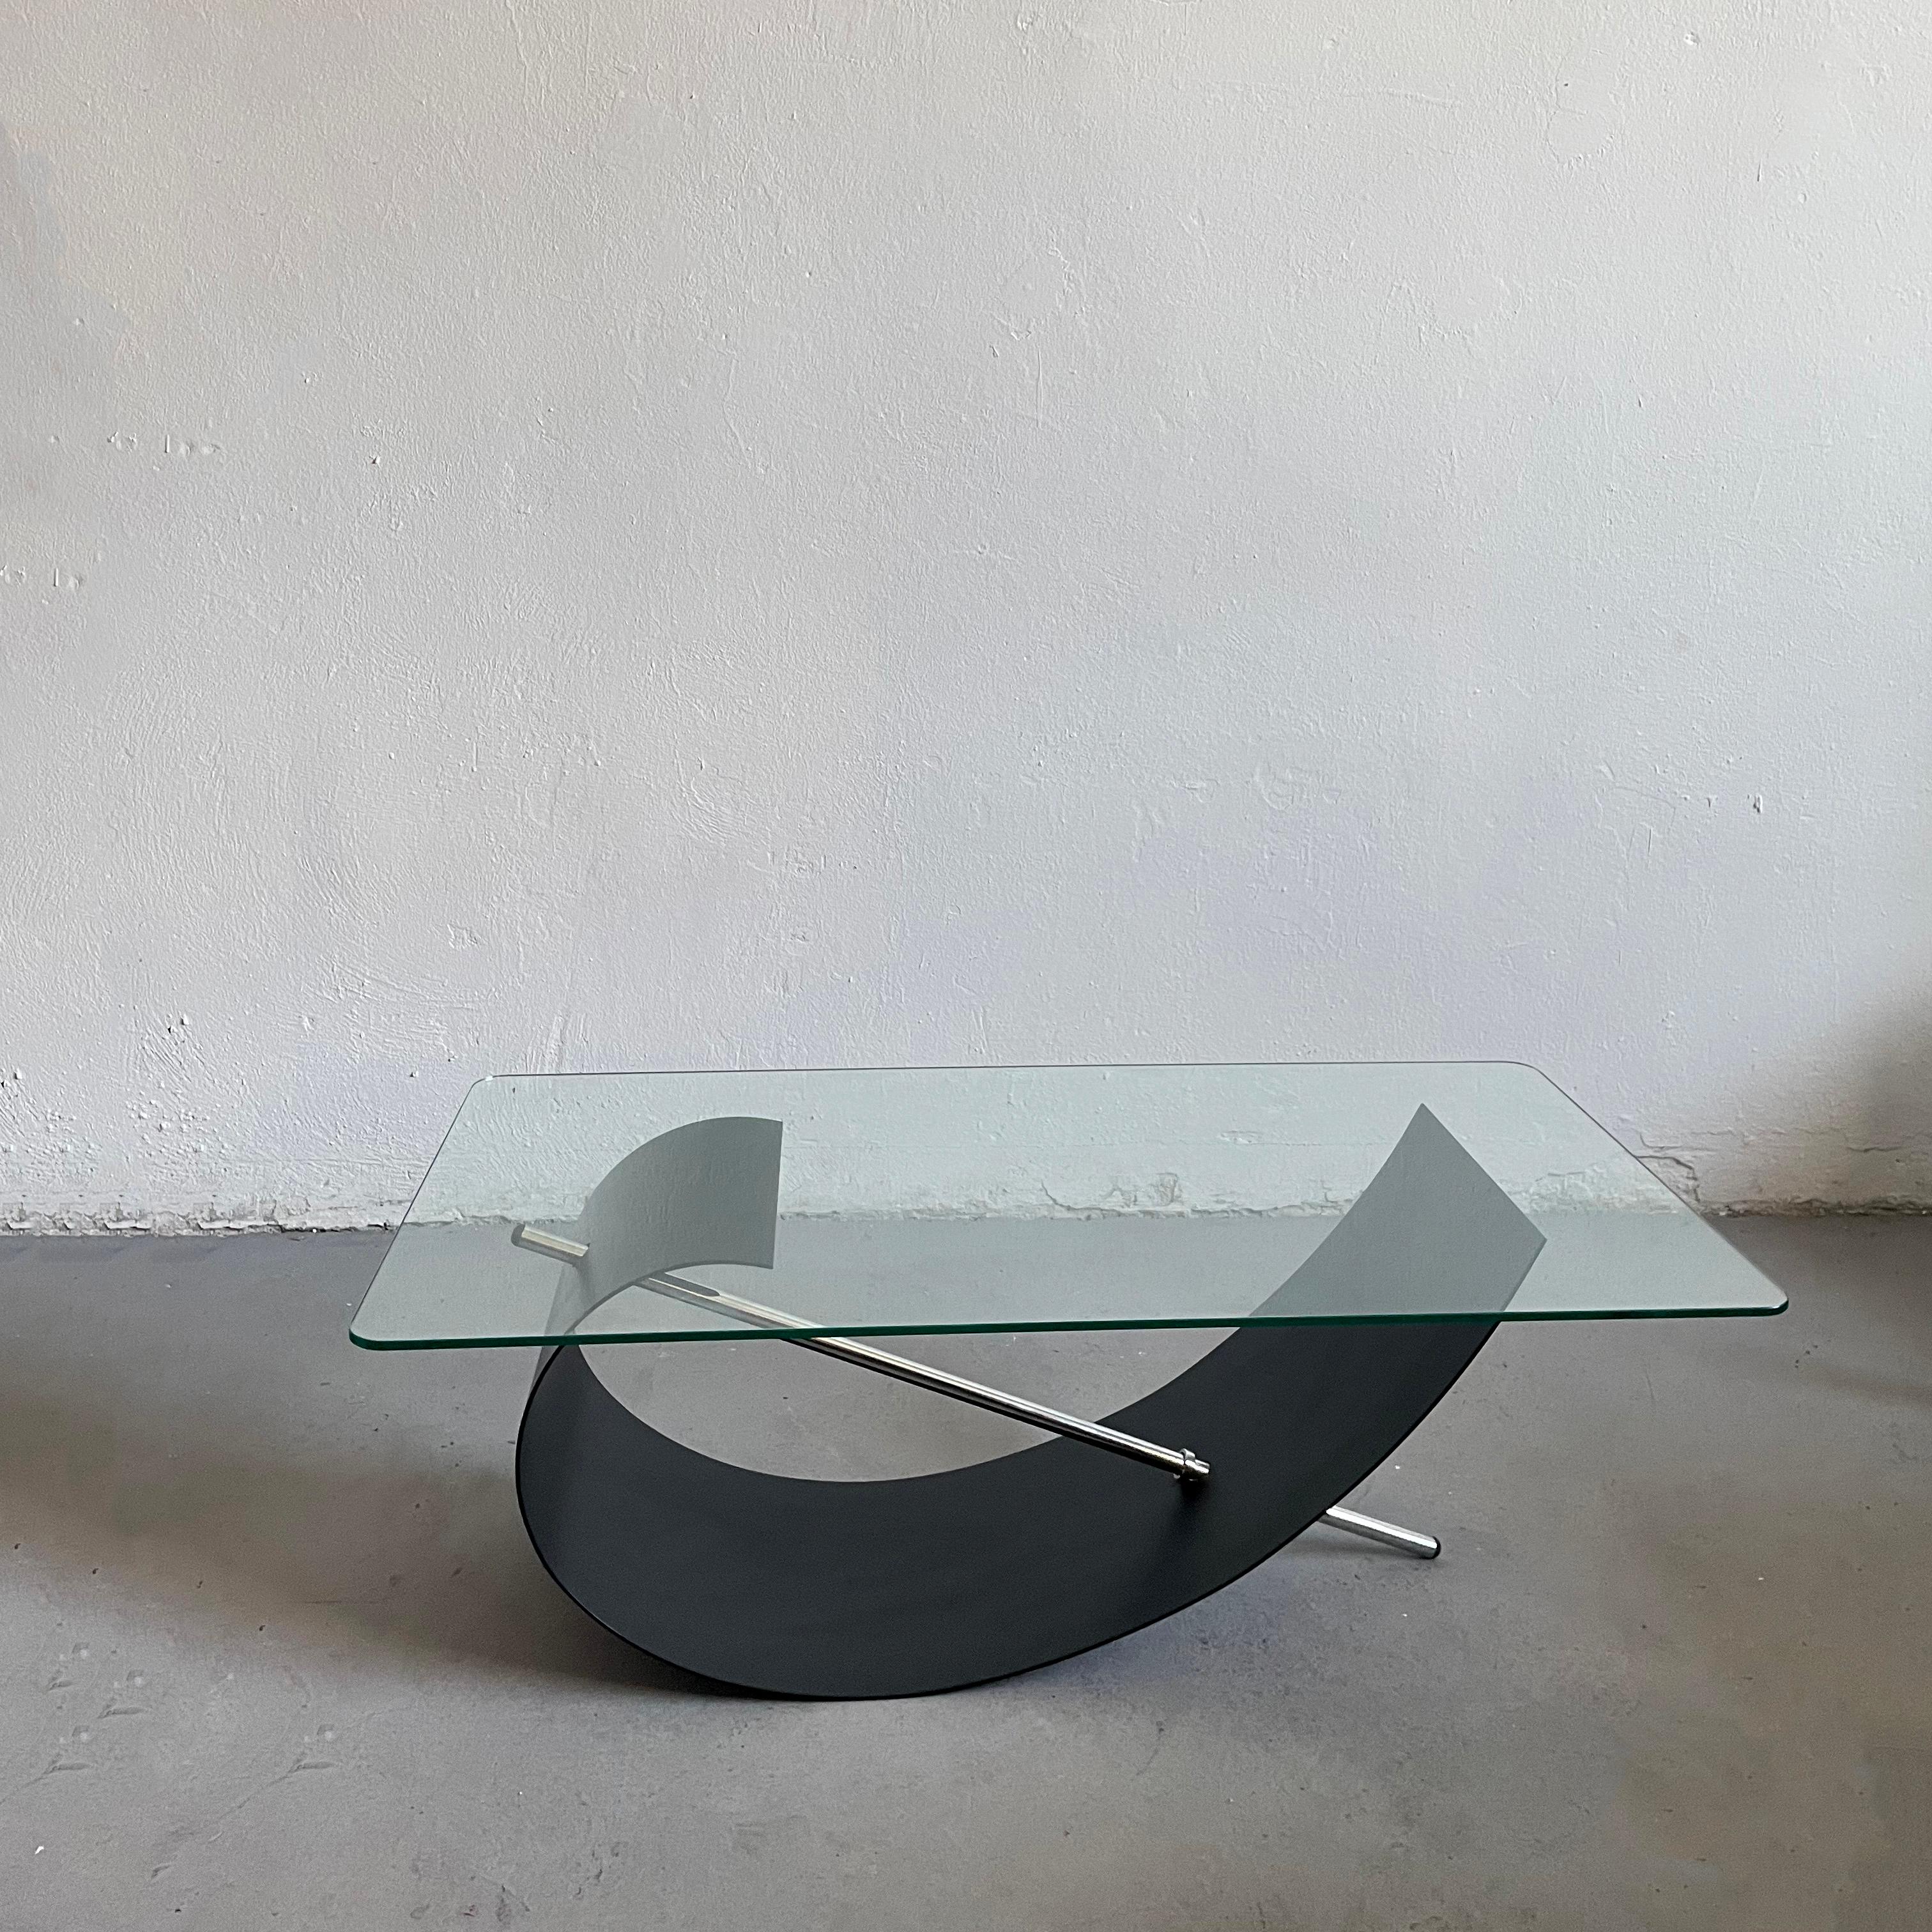 Cut Steel Sculptural Brutalist Steel and Glass Coffee Table For Sale